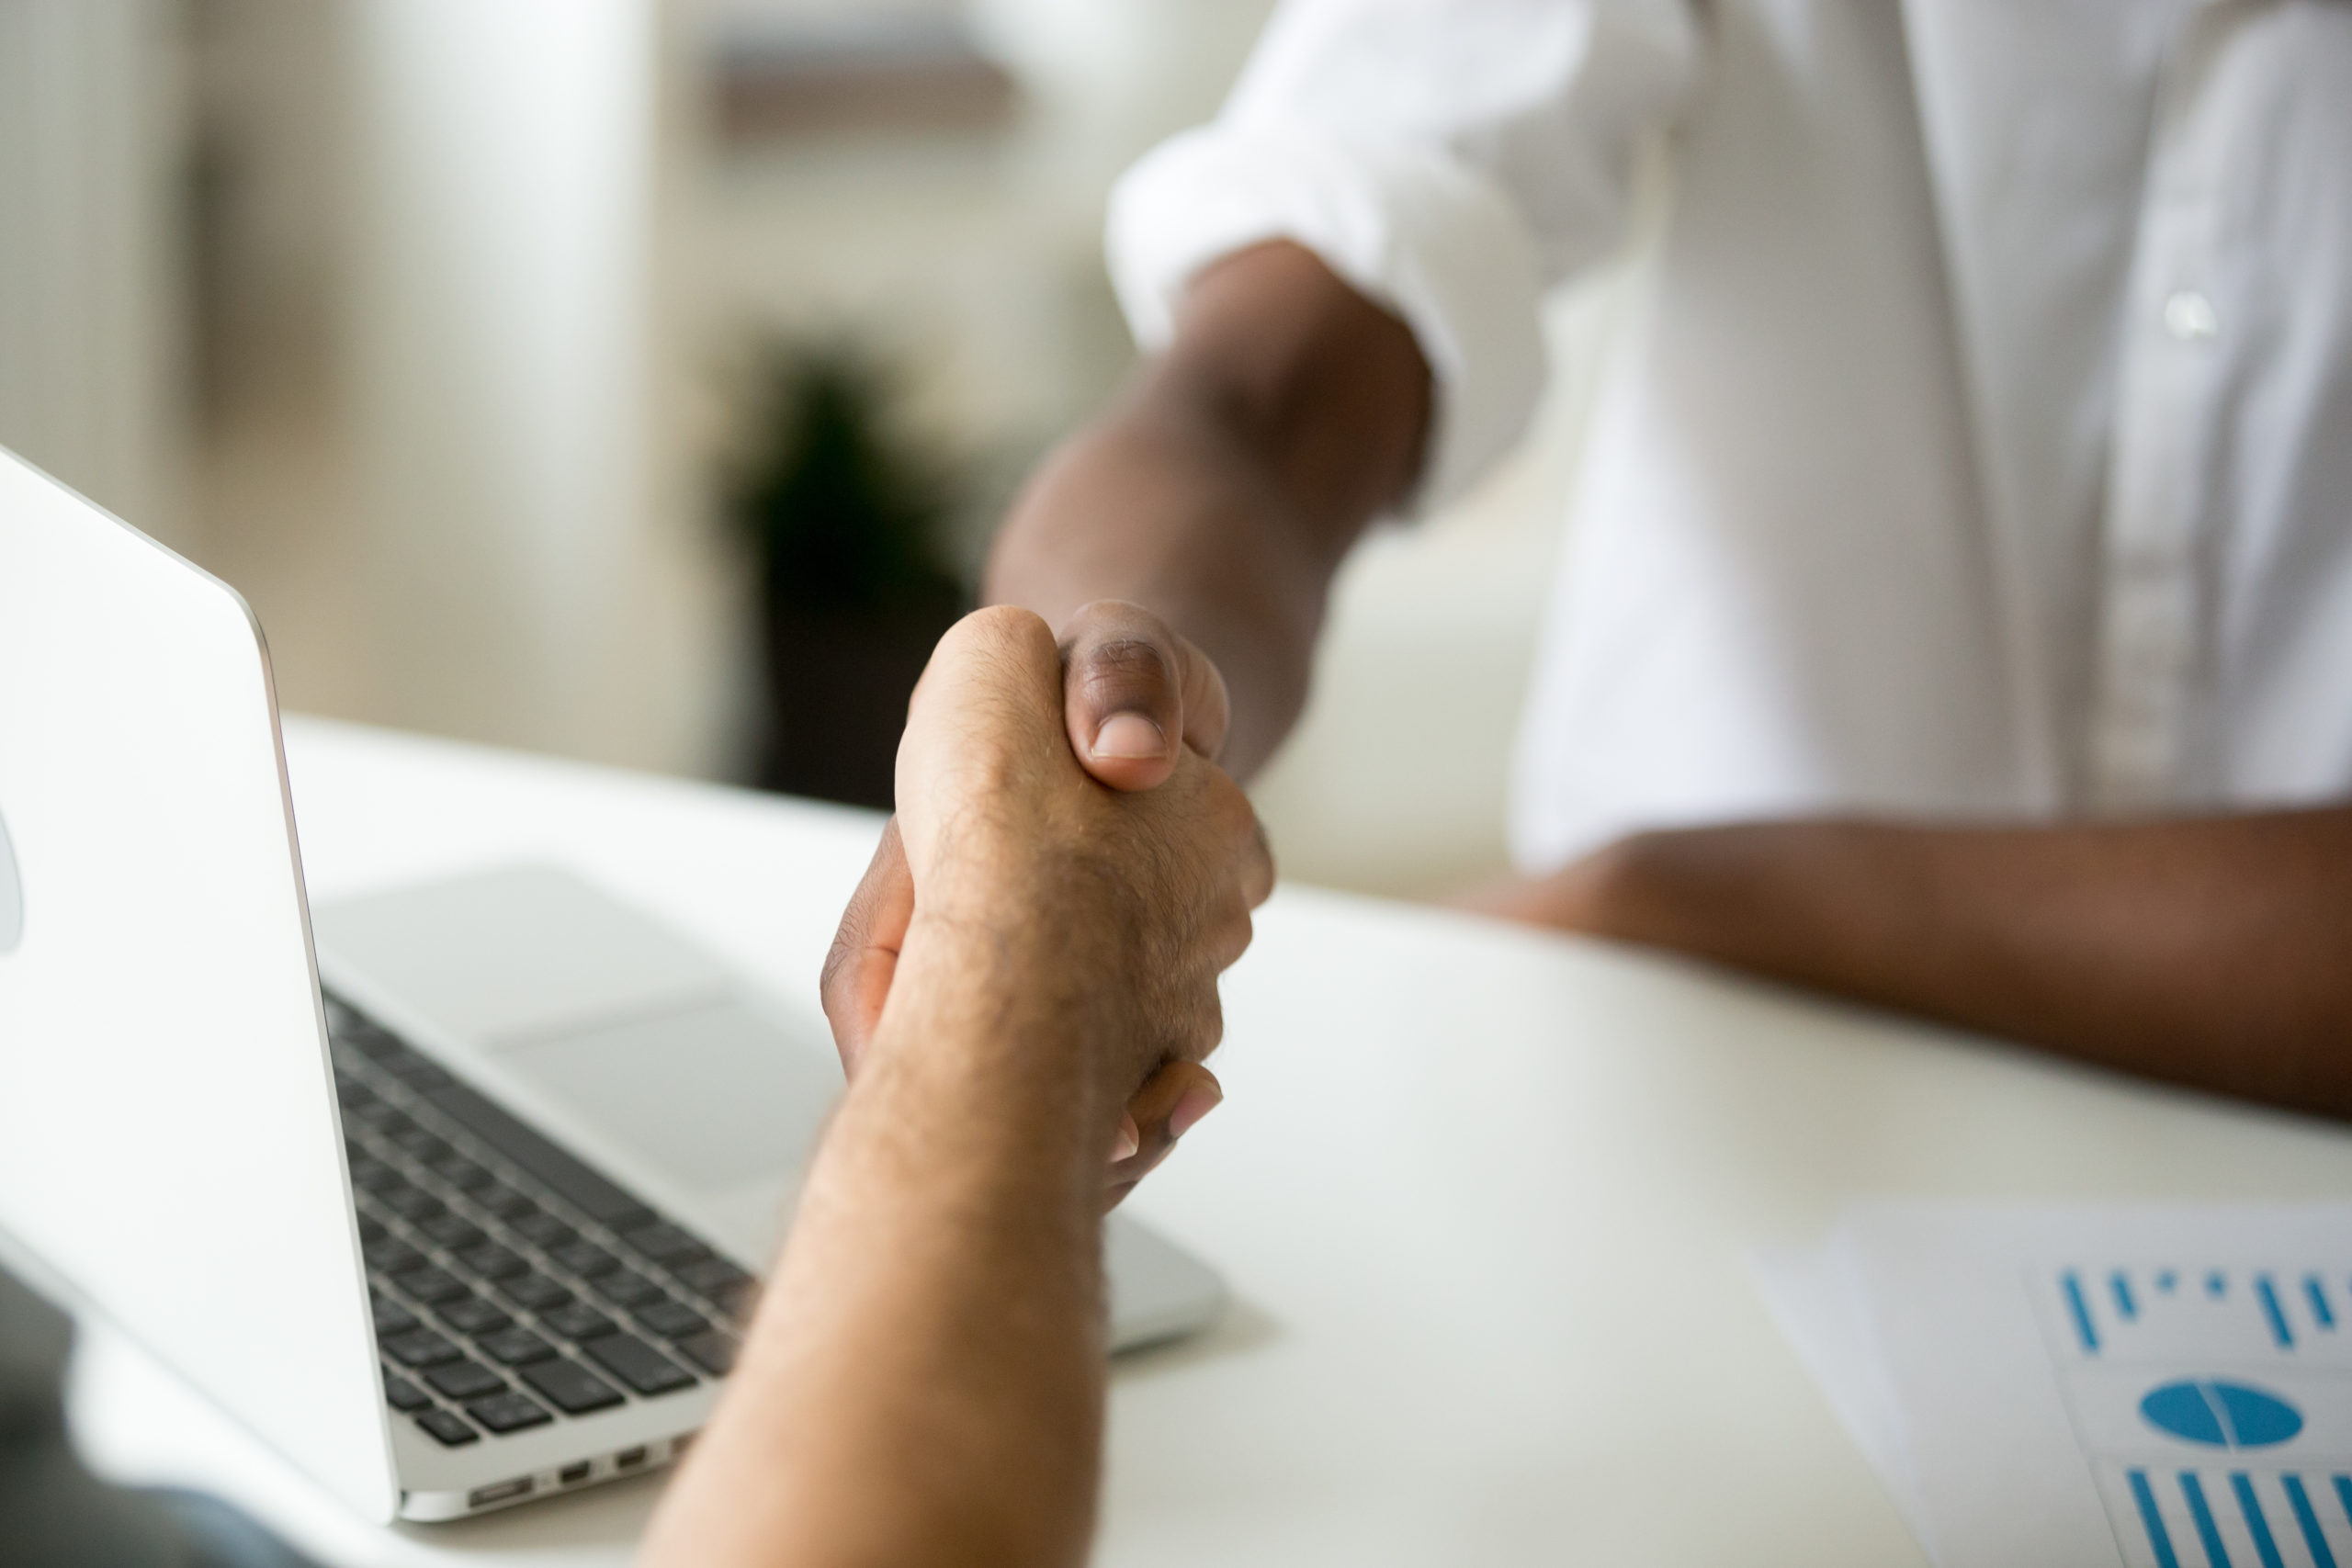 Two people shake hands as they enter a business agreement. This represents the partnership between organization’s looking to undergo a cloud migration and the cloud services partner they choose to help them take on the task.